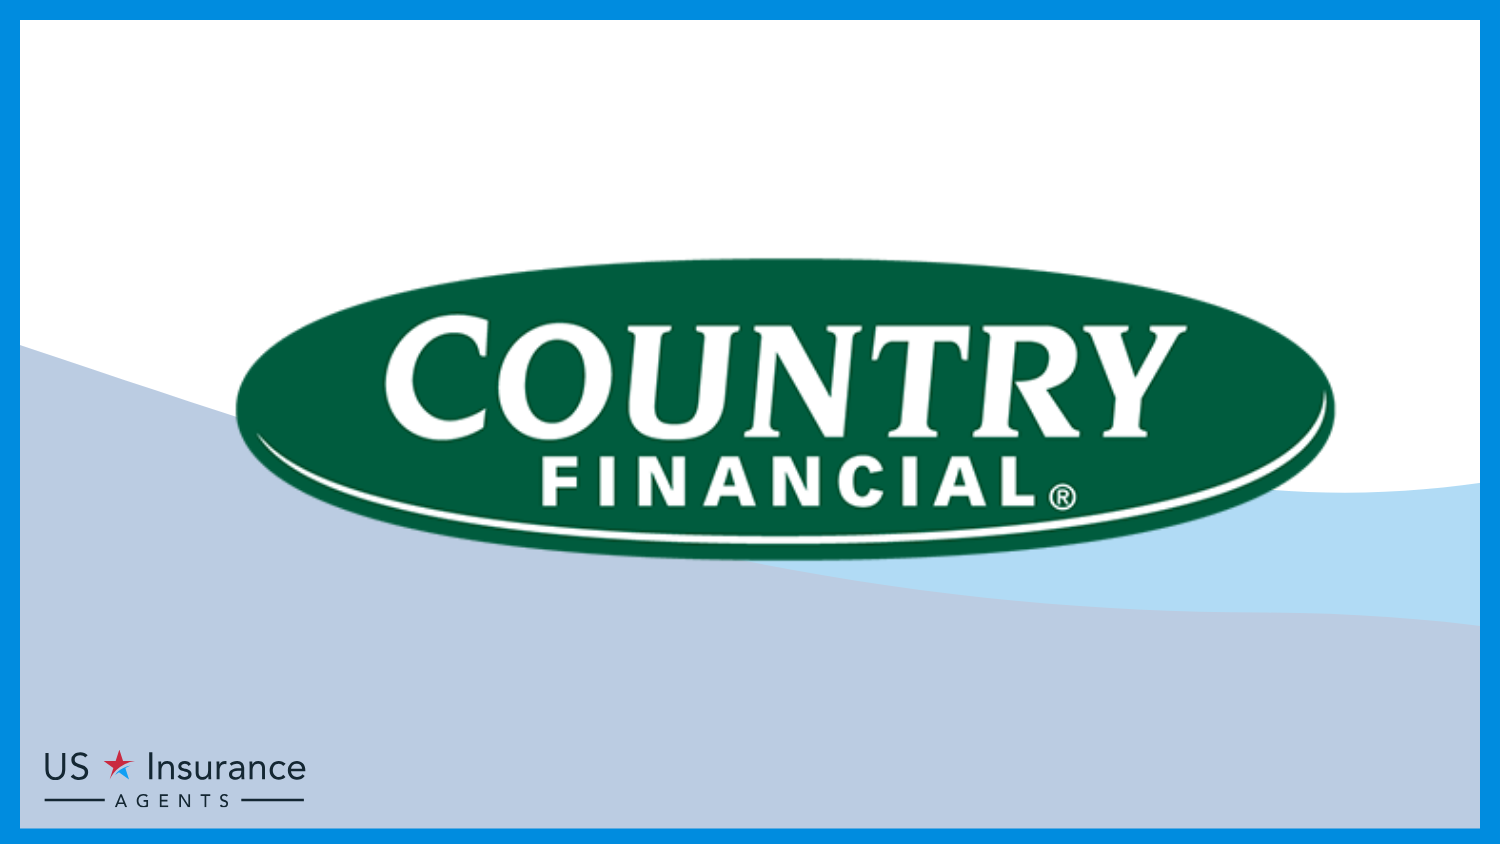 Country Financial: Best Business Insurance for Livestock Farms